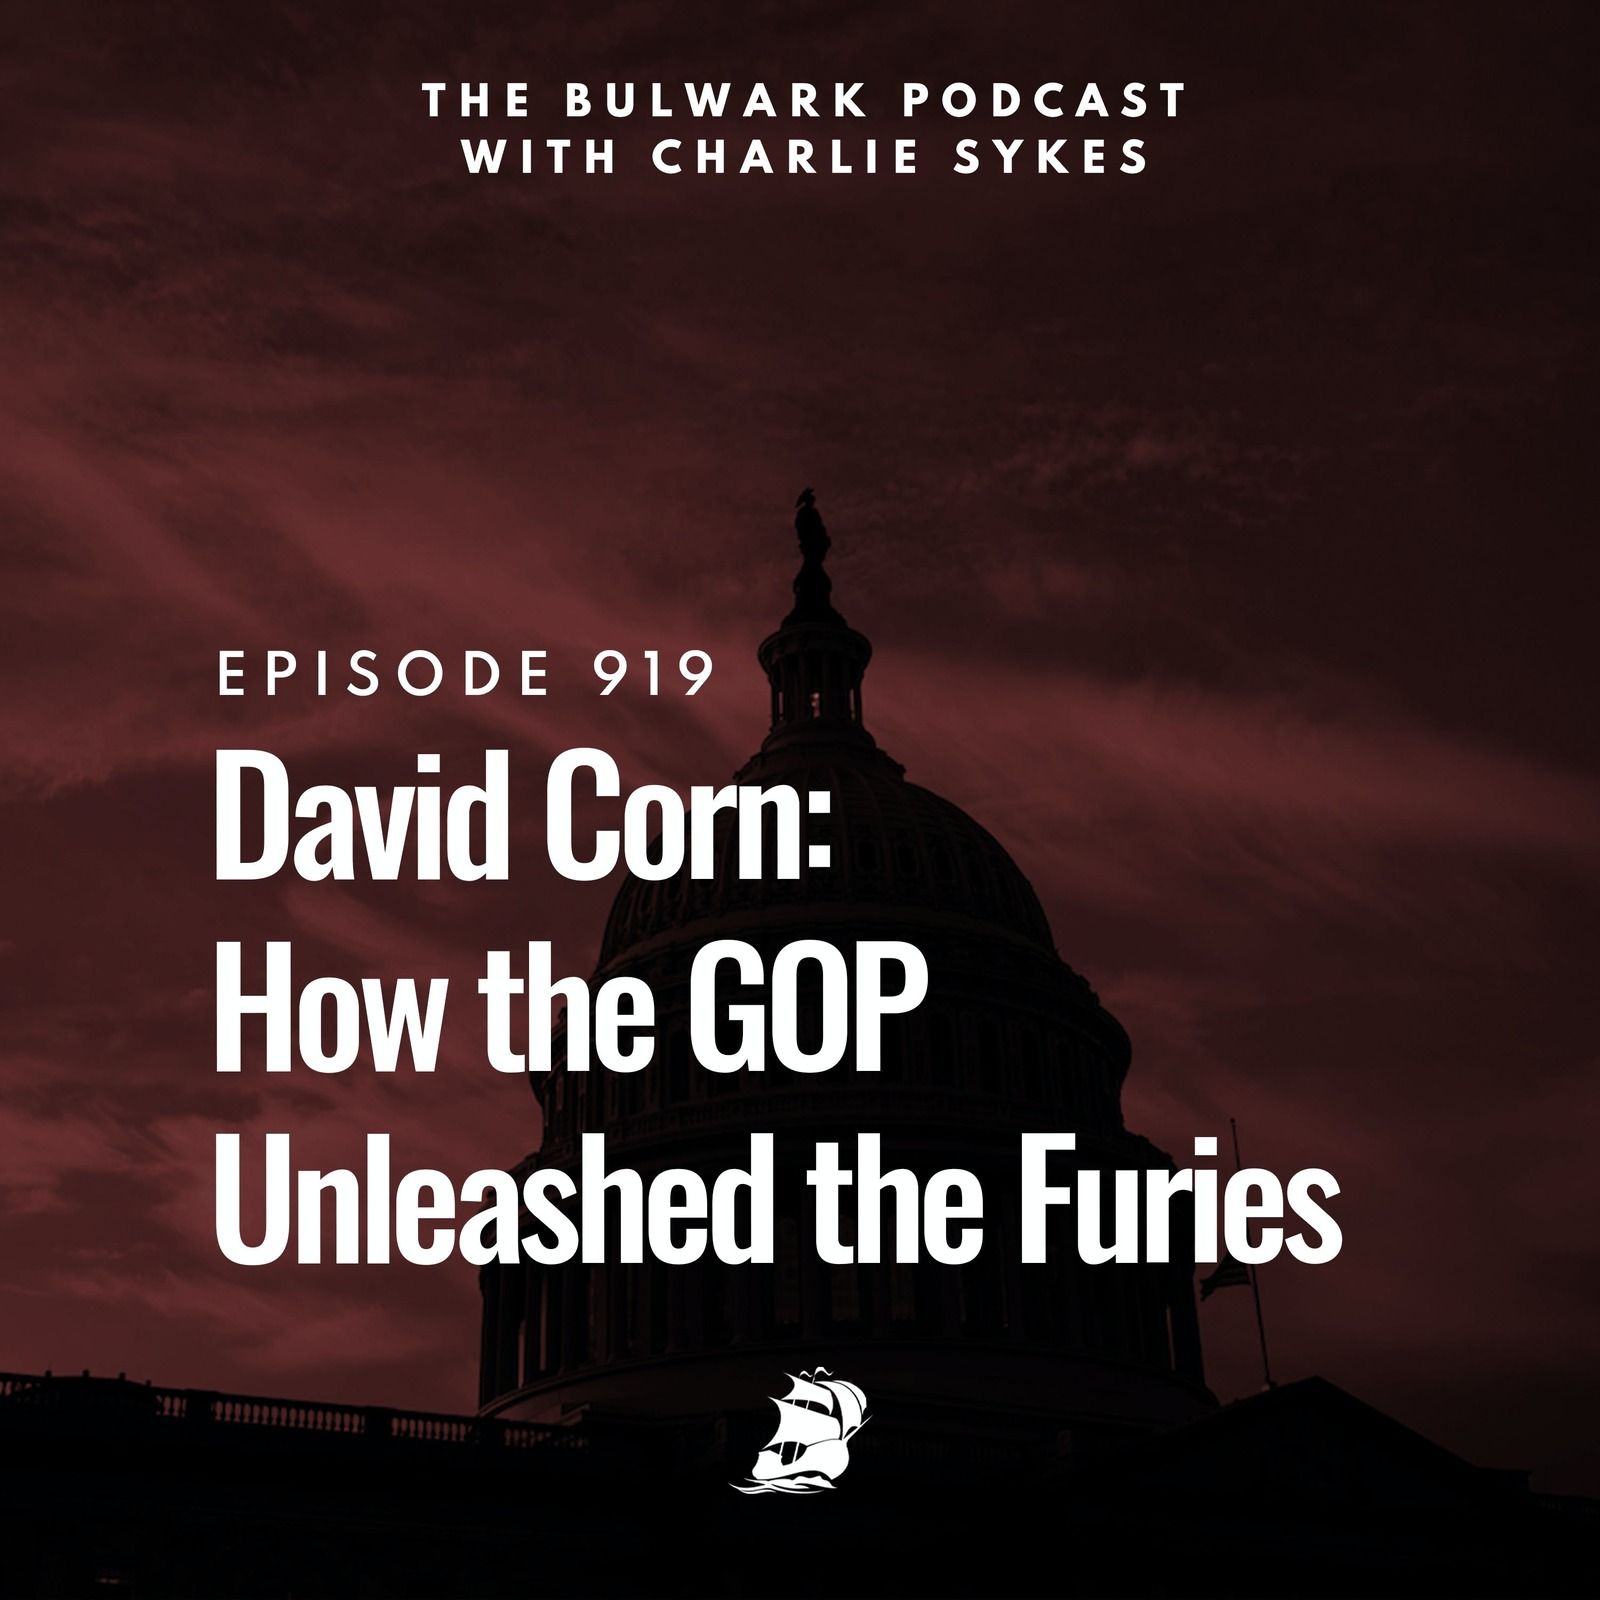 David Corn: How the GOP Unleashed the Furies